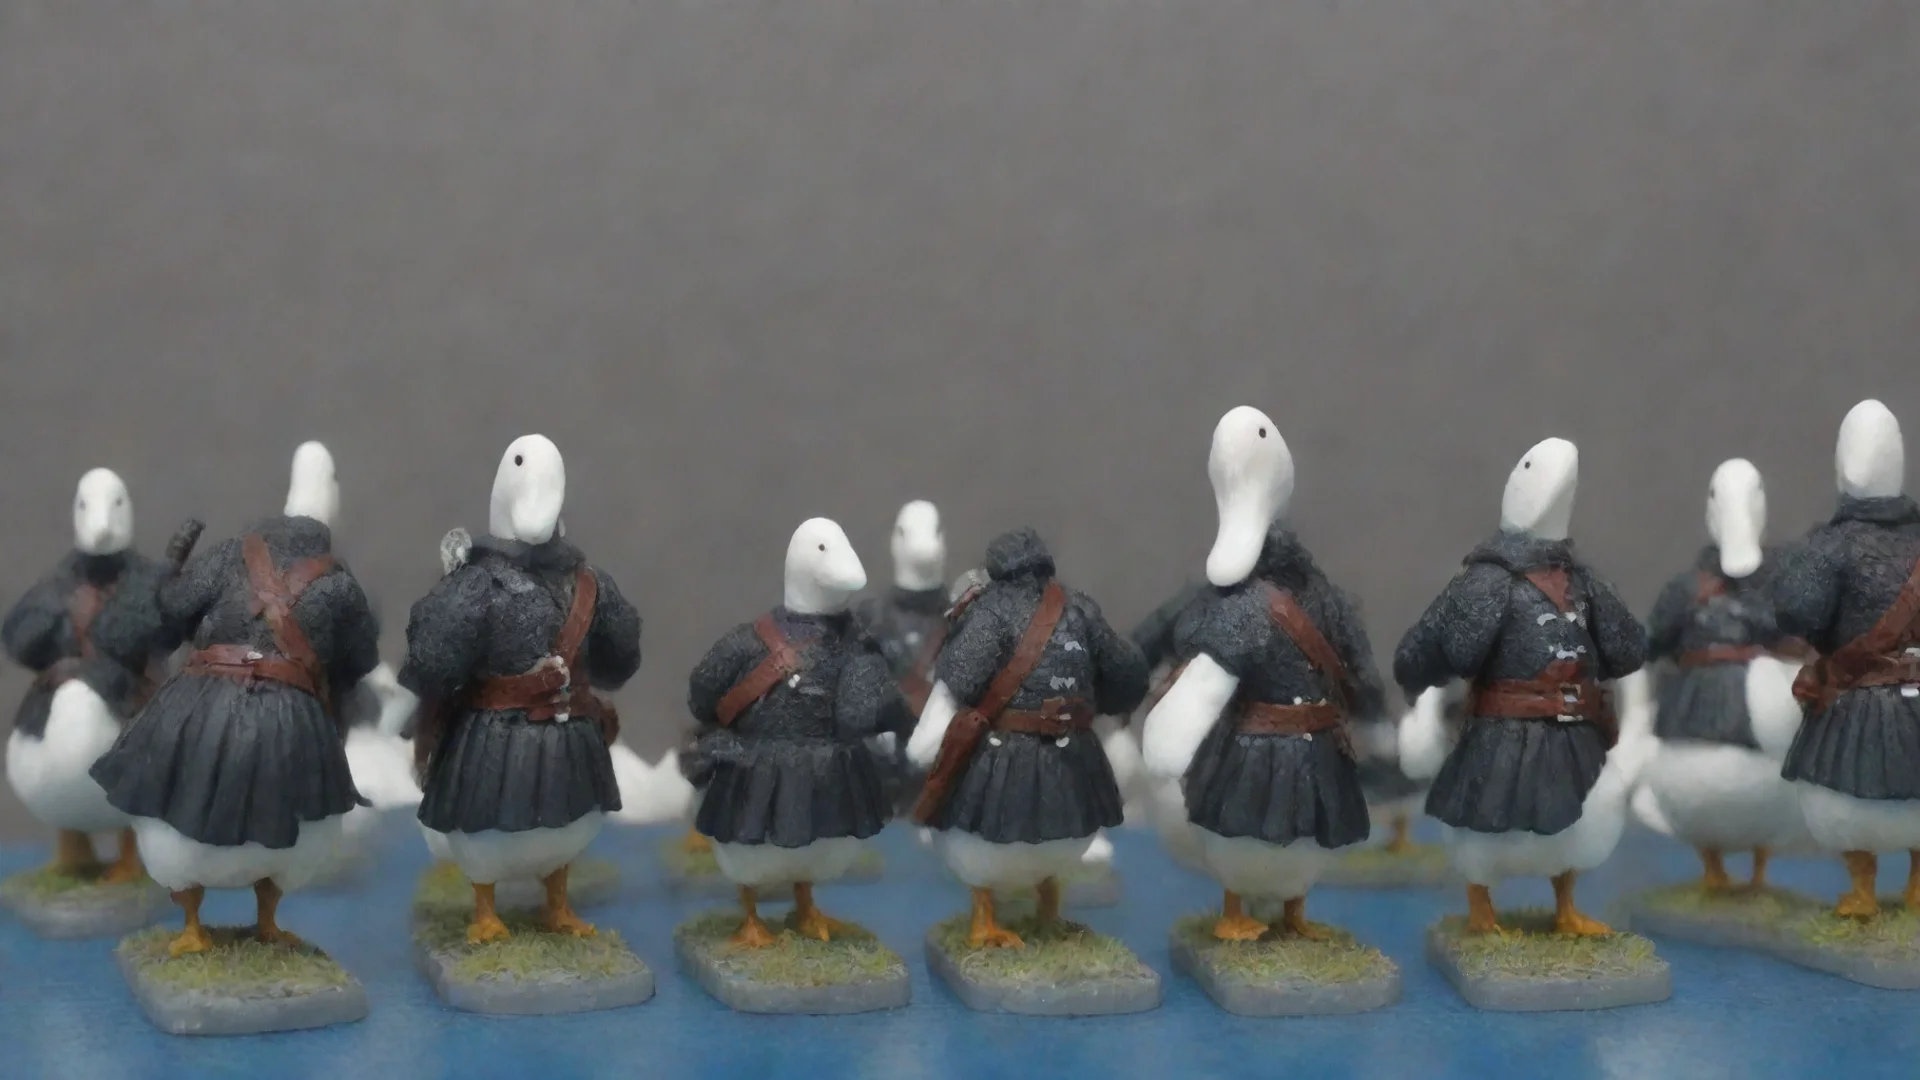 aiamazing knights hospitaller duck army with white crossing awesome portrait 2 hdwidescreen